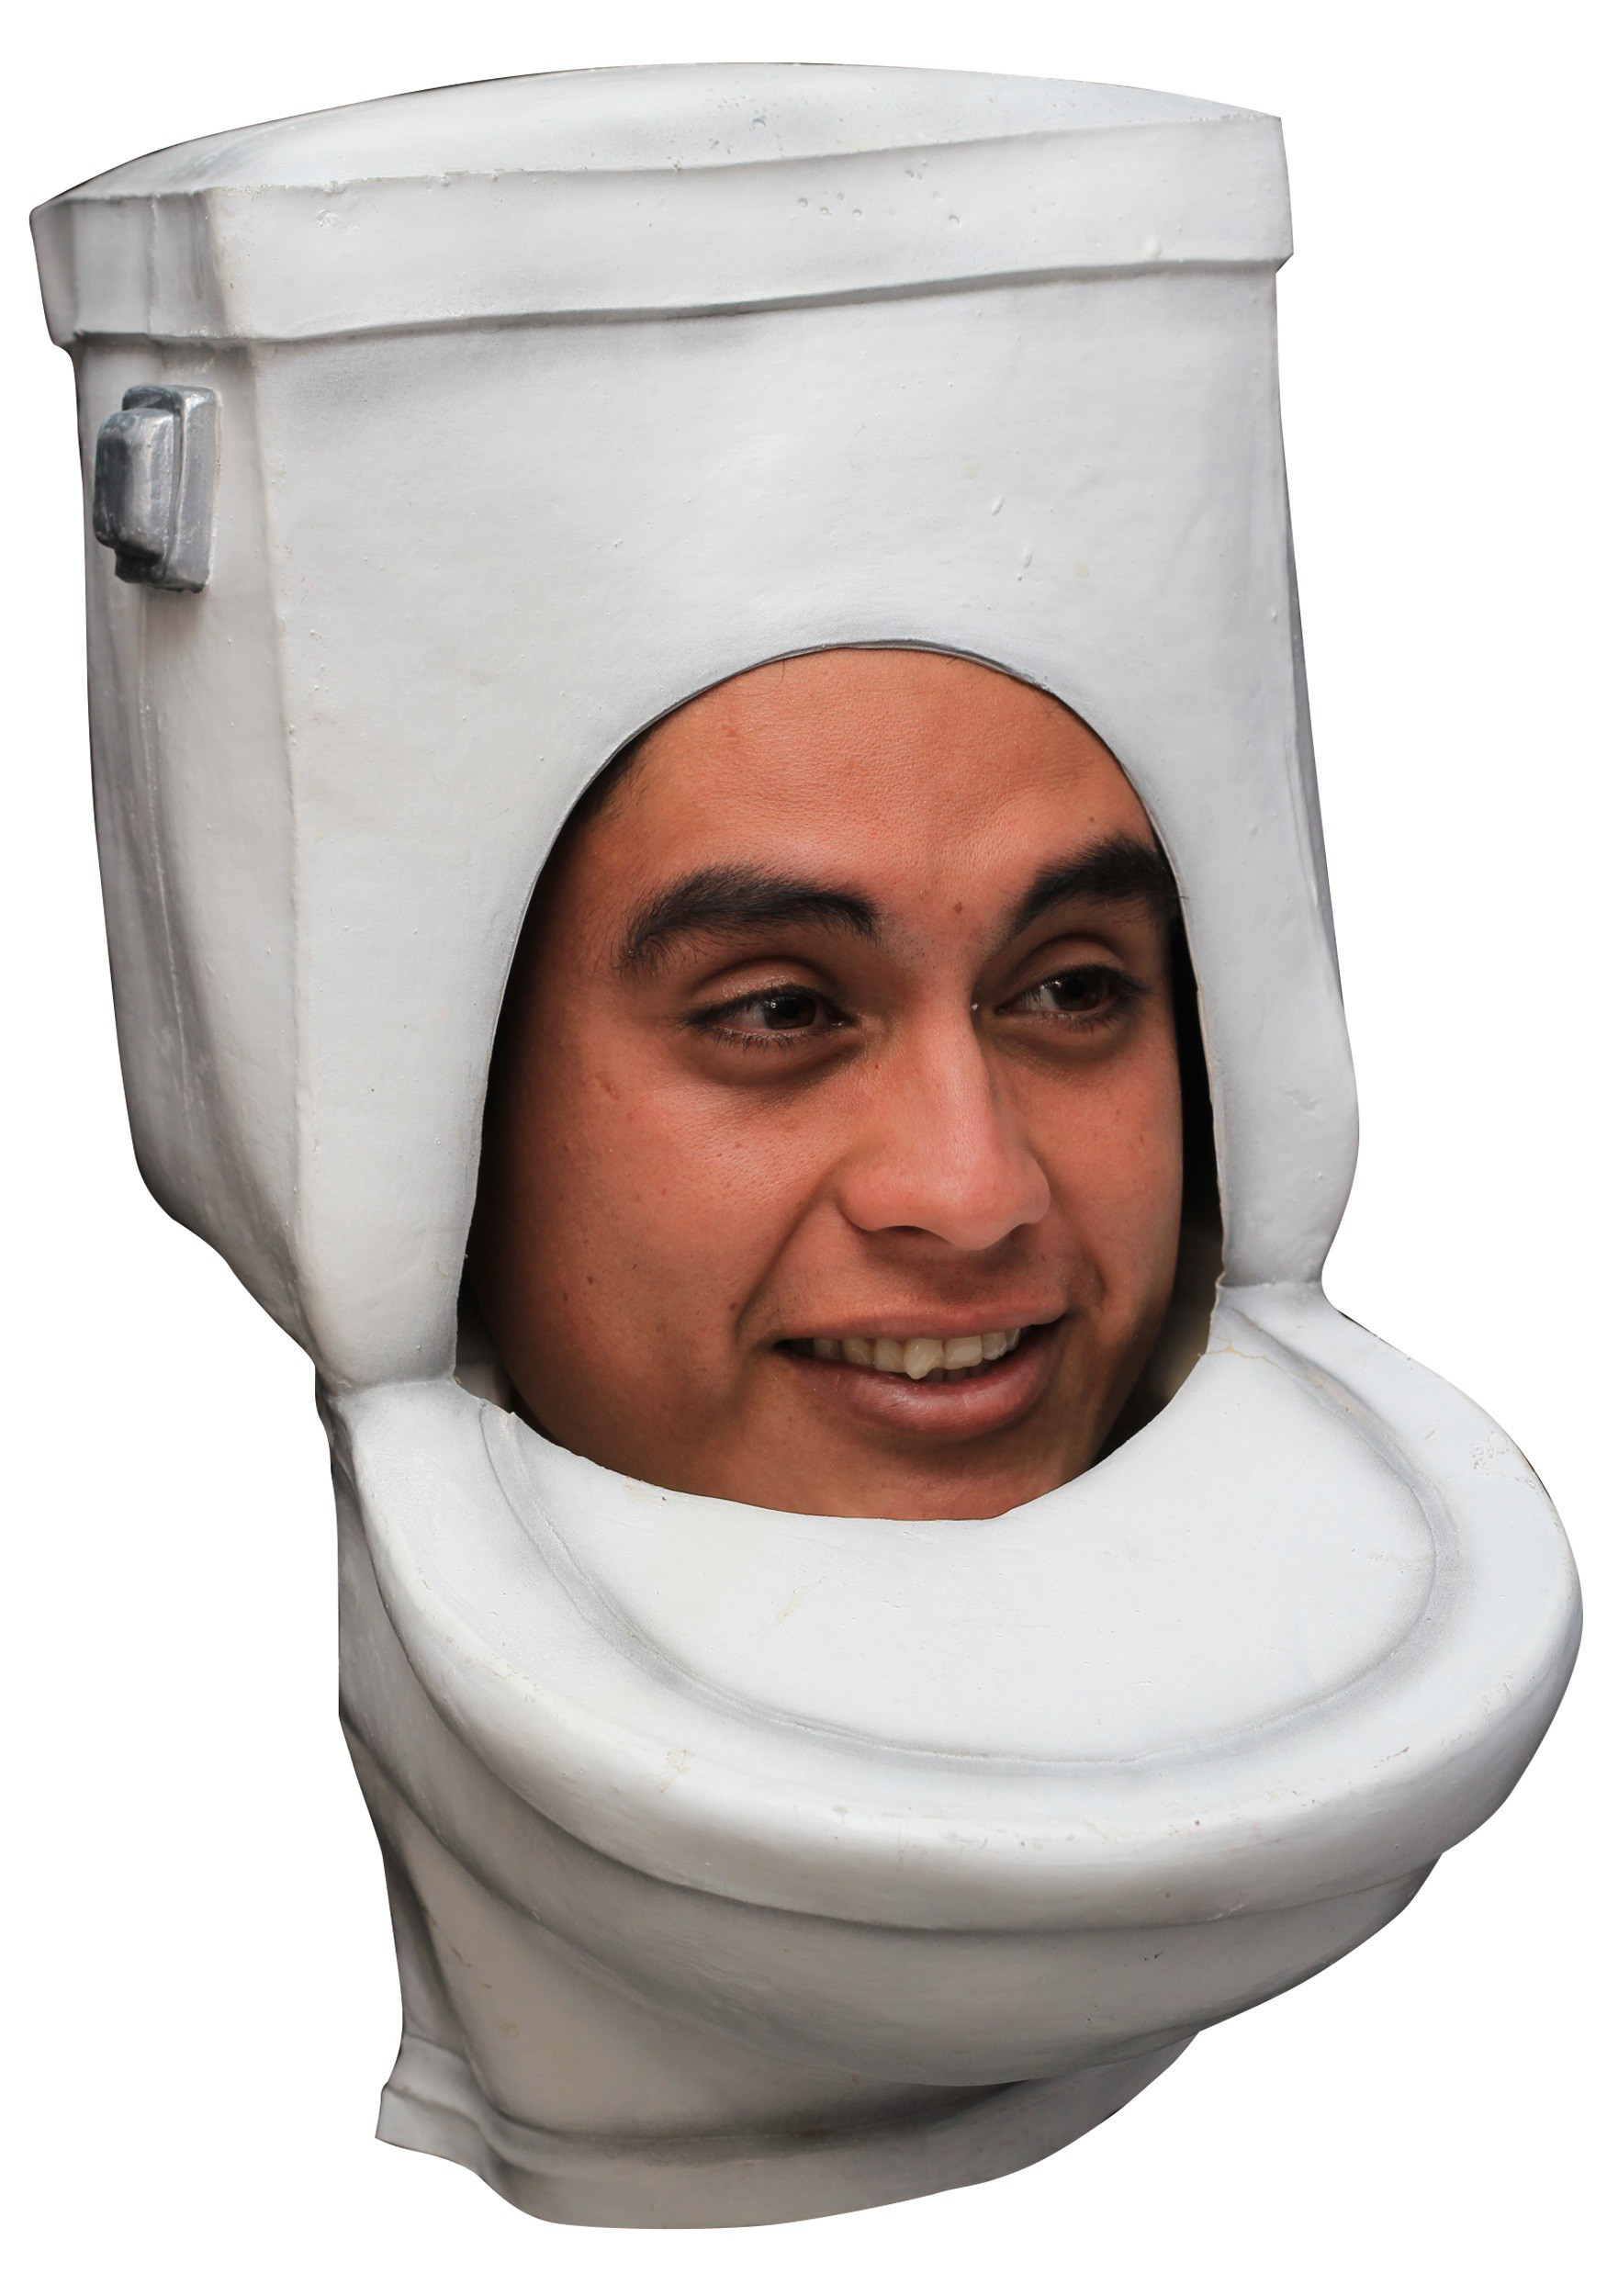 Toilet Halloween Costumes
 The Toilet Adult Mask